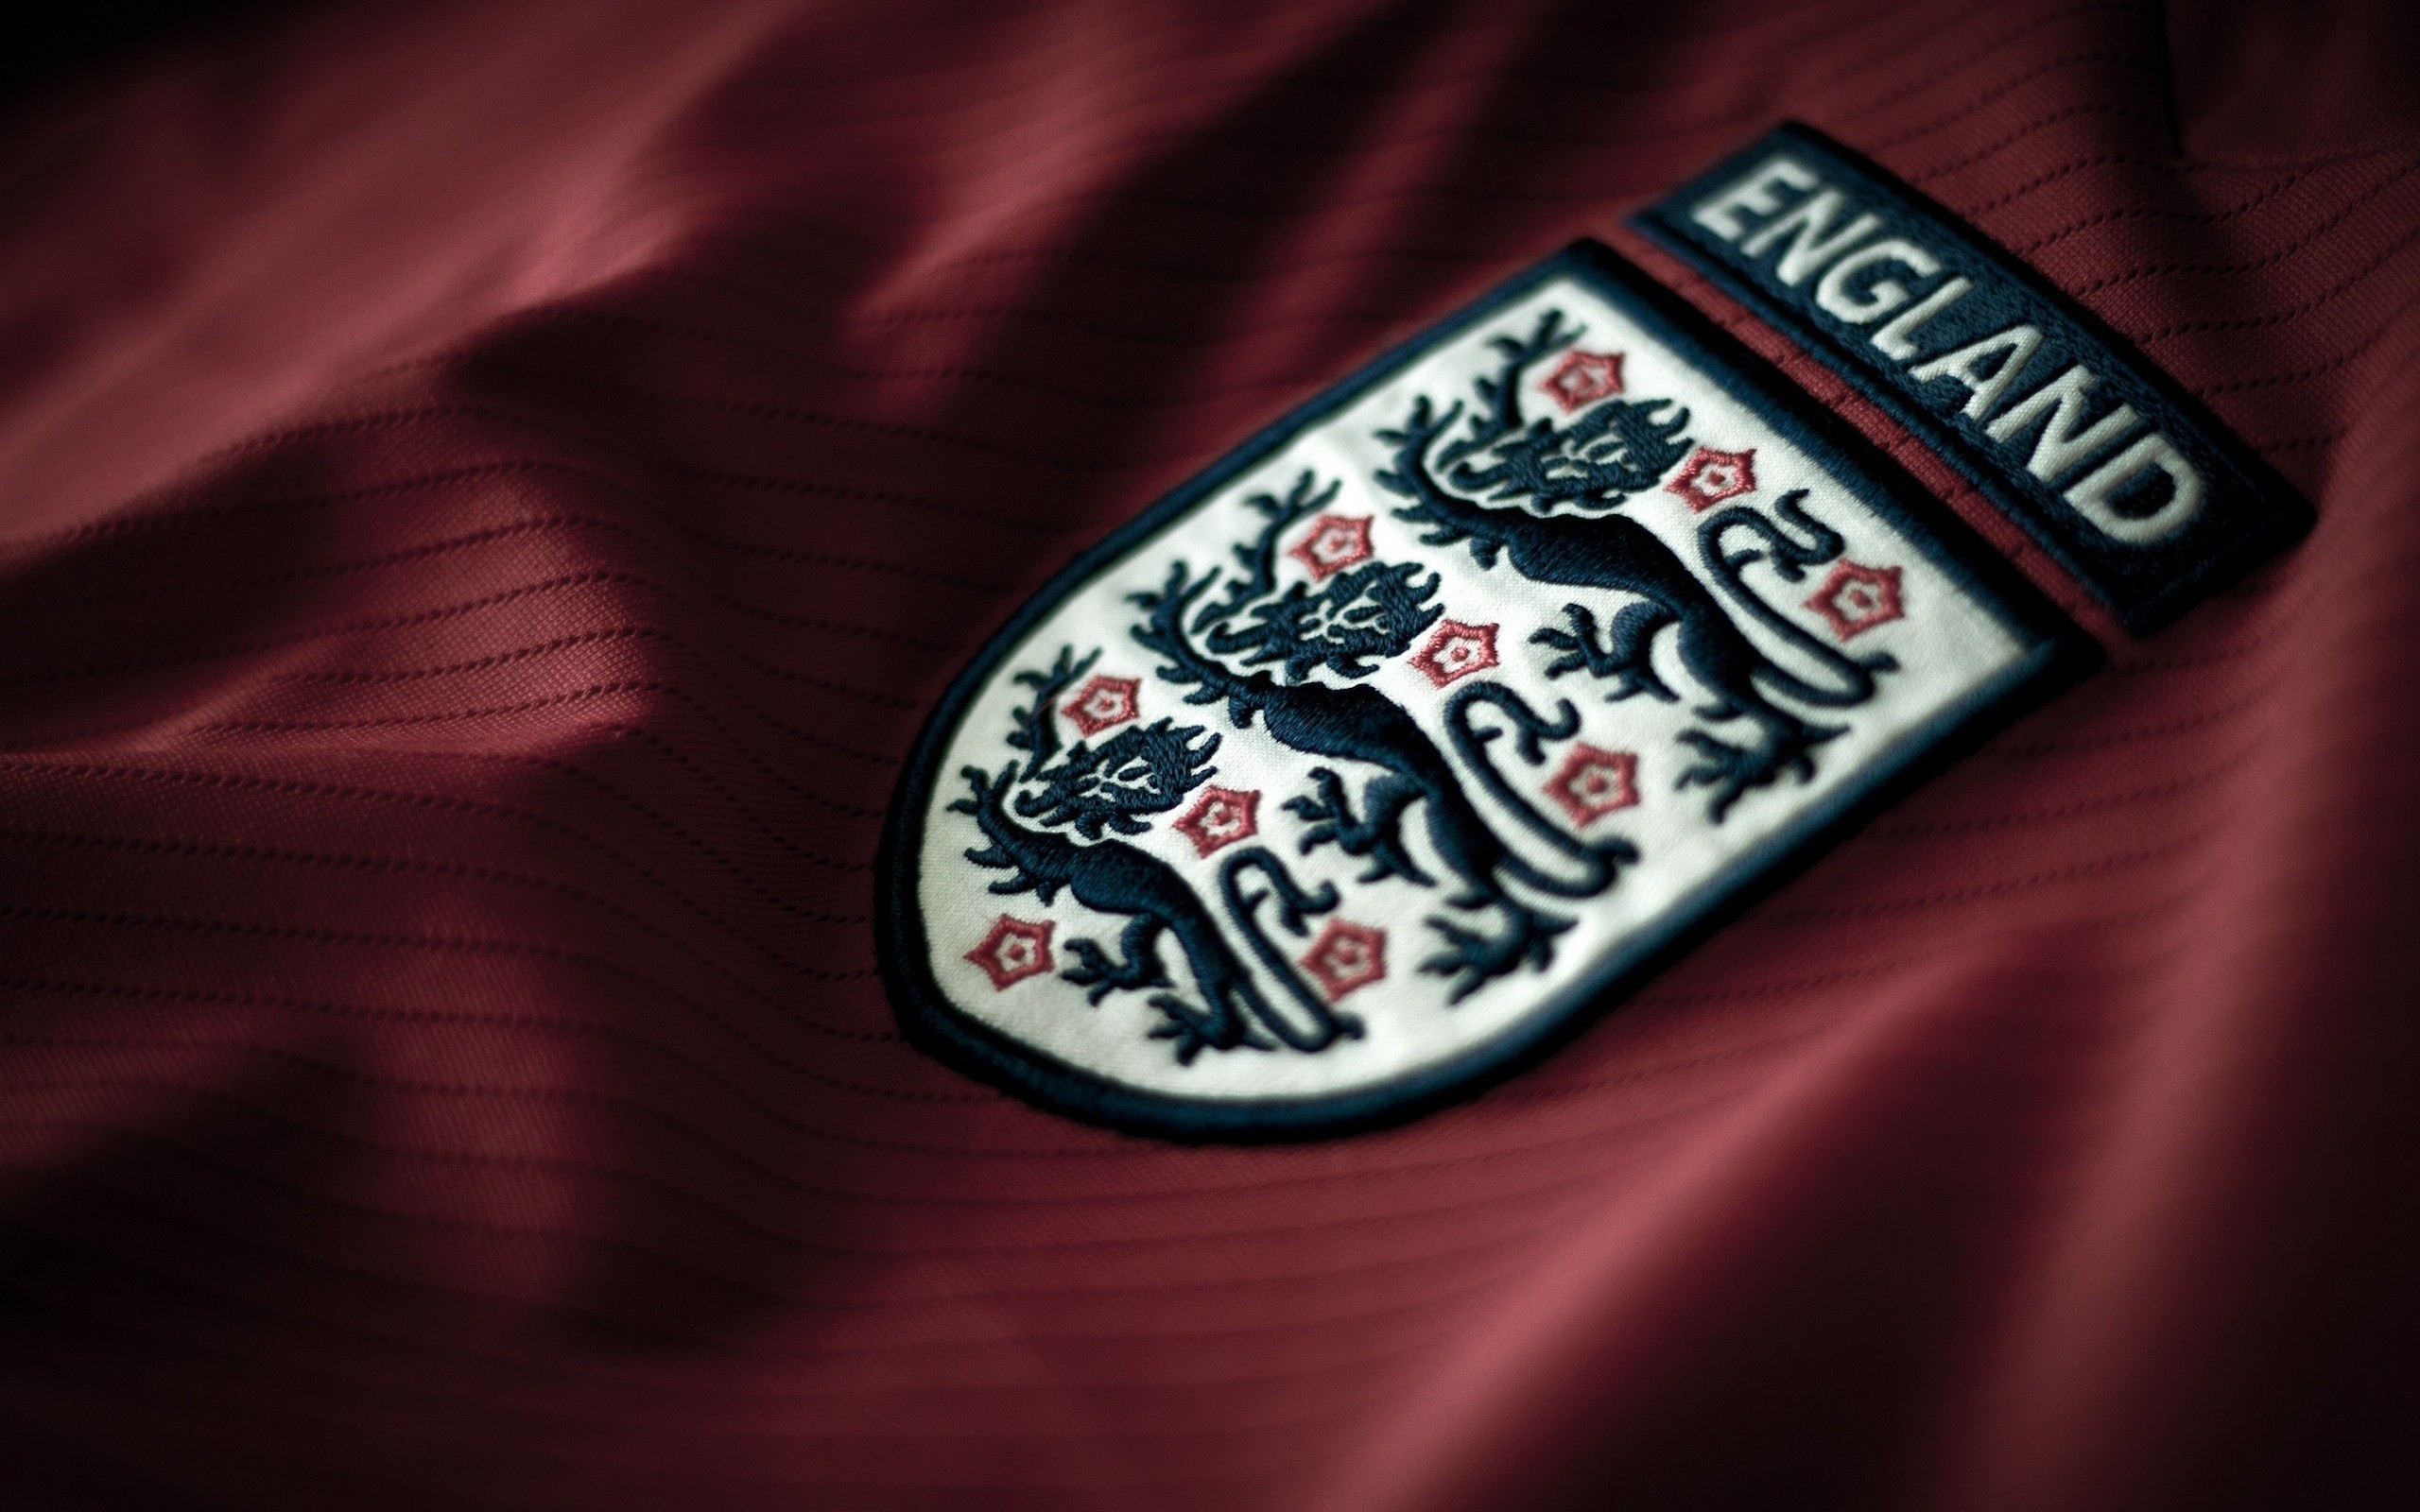 England National Football Team Wallpaper And Background Image